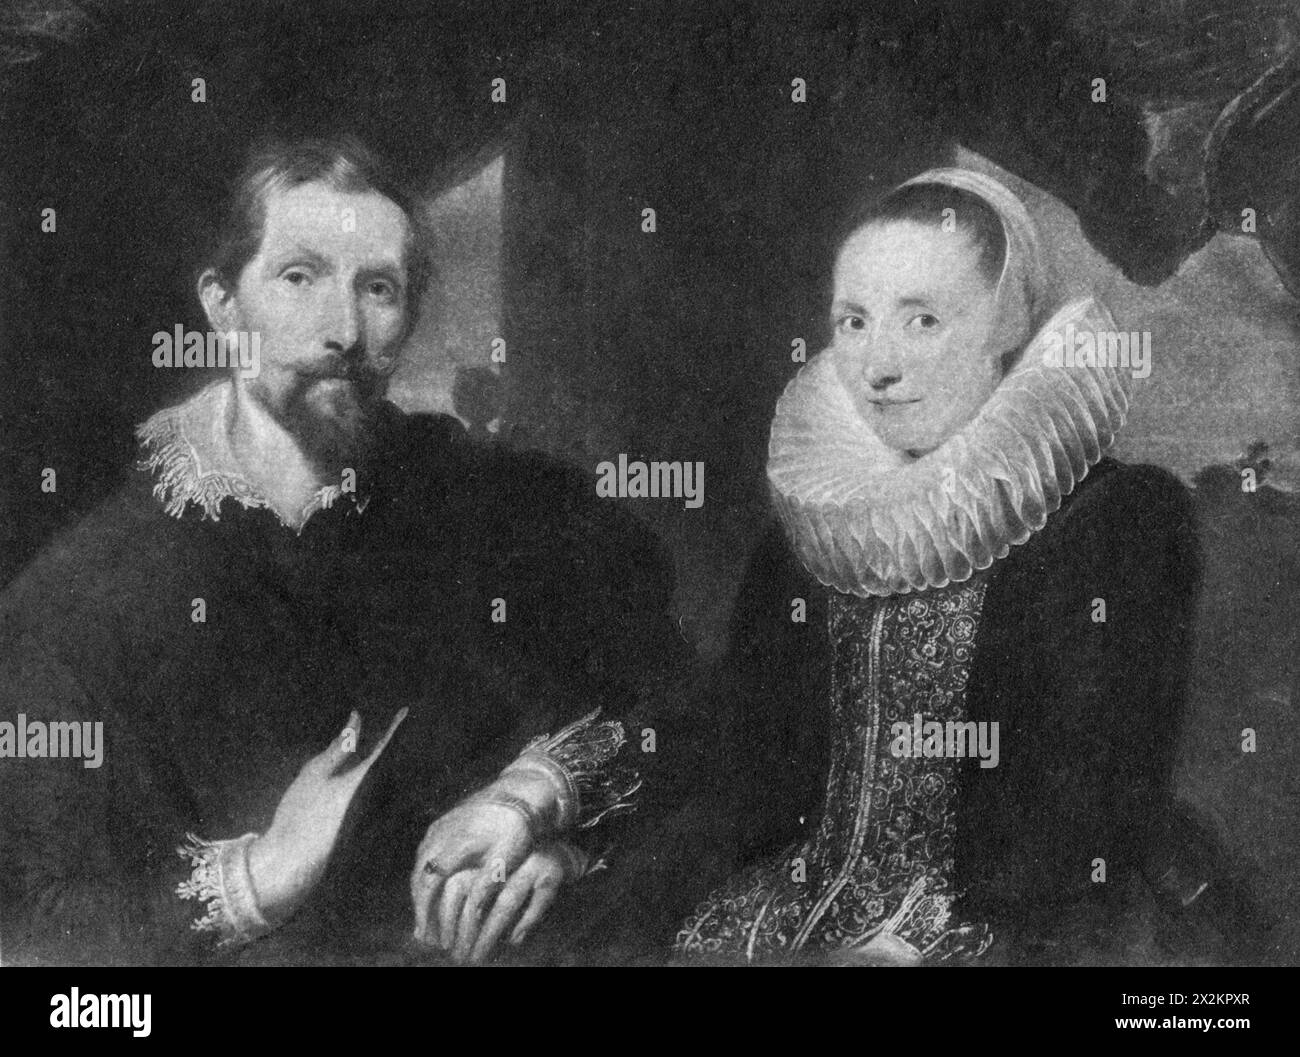 Snyders, Frans, 11.11.1579 - 19.8,1657, flämischer Maler, mit seiner Frau, ADDITIONAL-RIGHTS-CLEARANCE-INFO-NOT-AVAILABLE Stockfoto